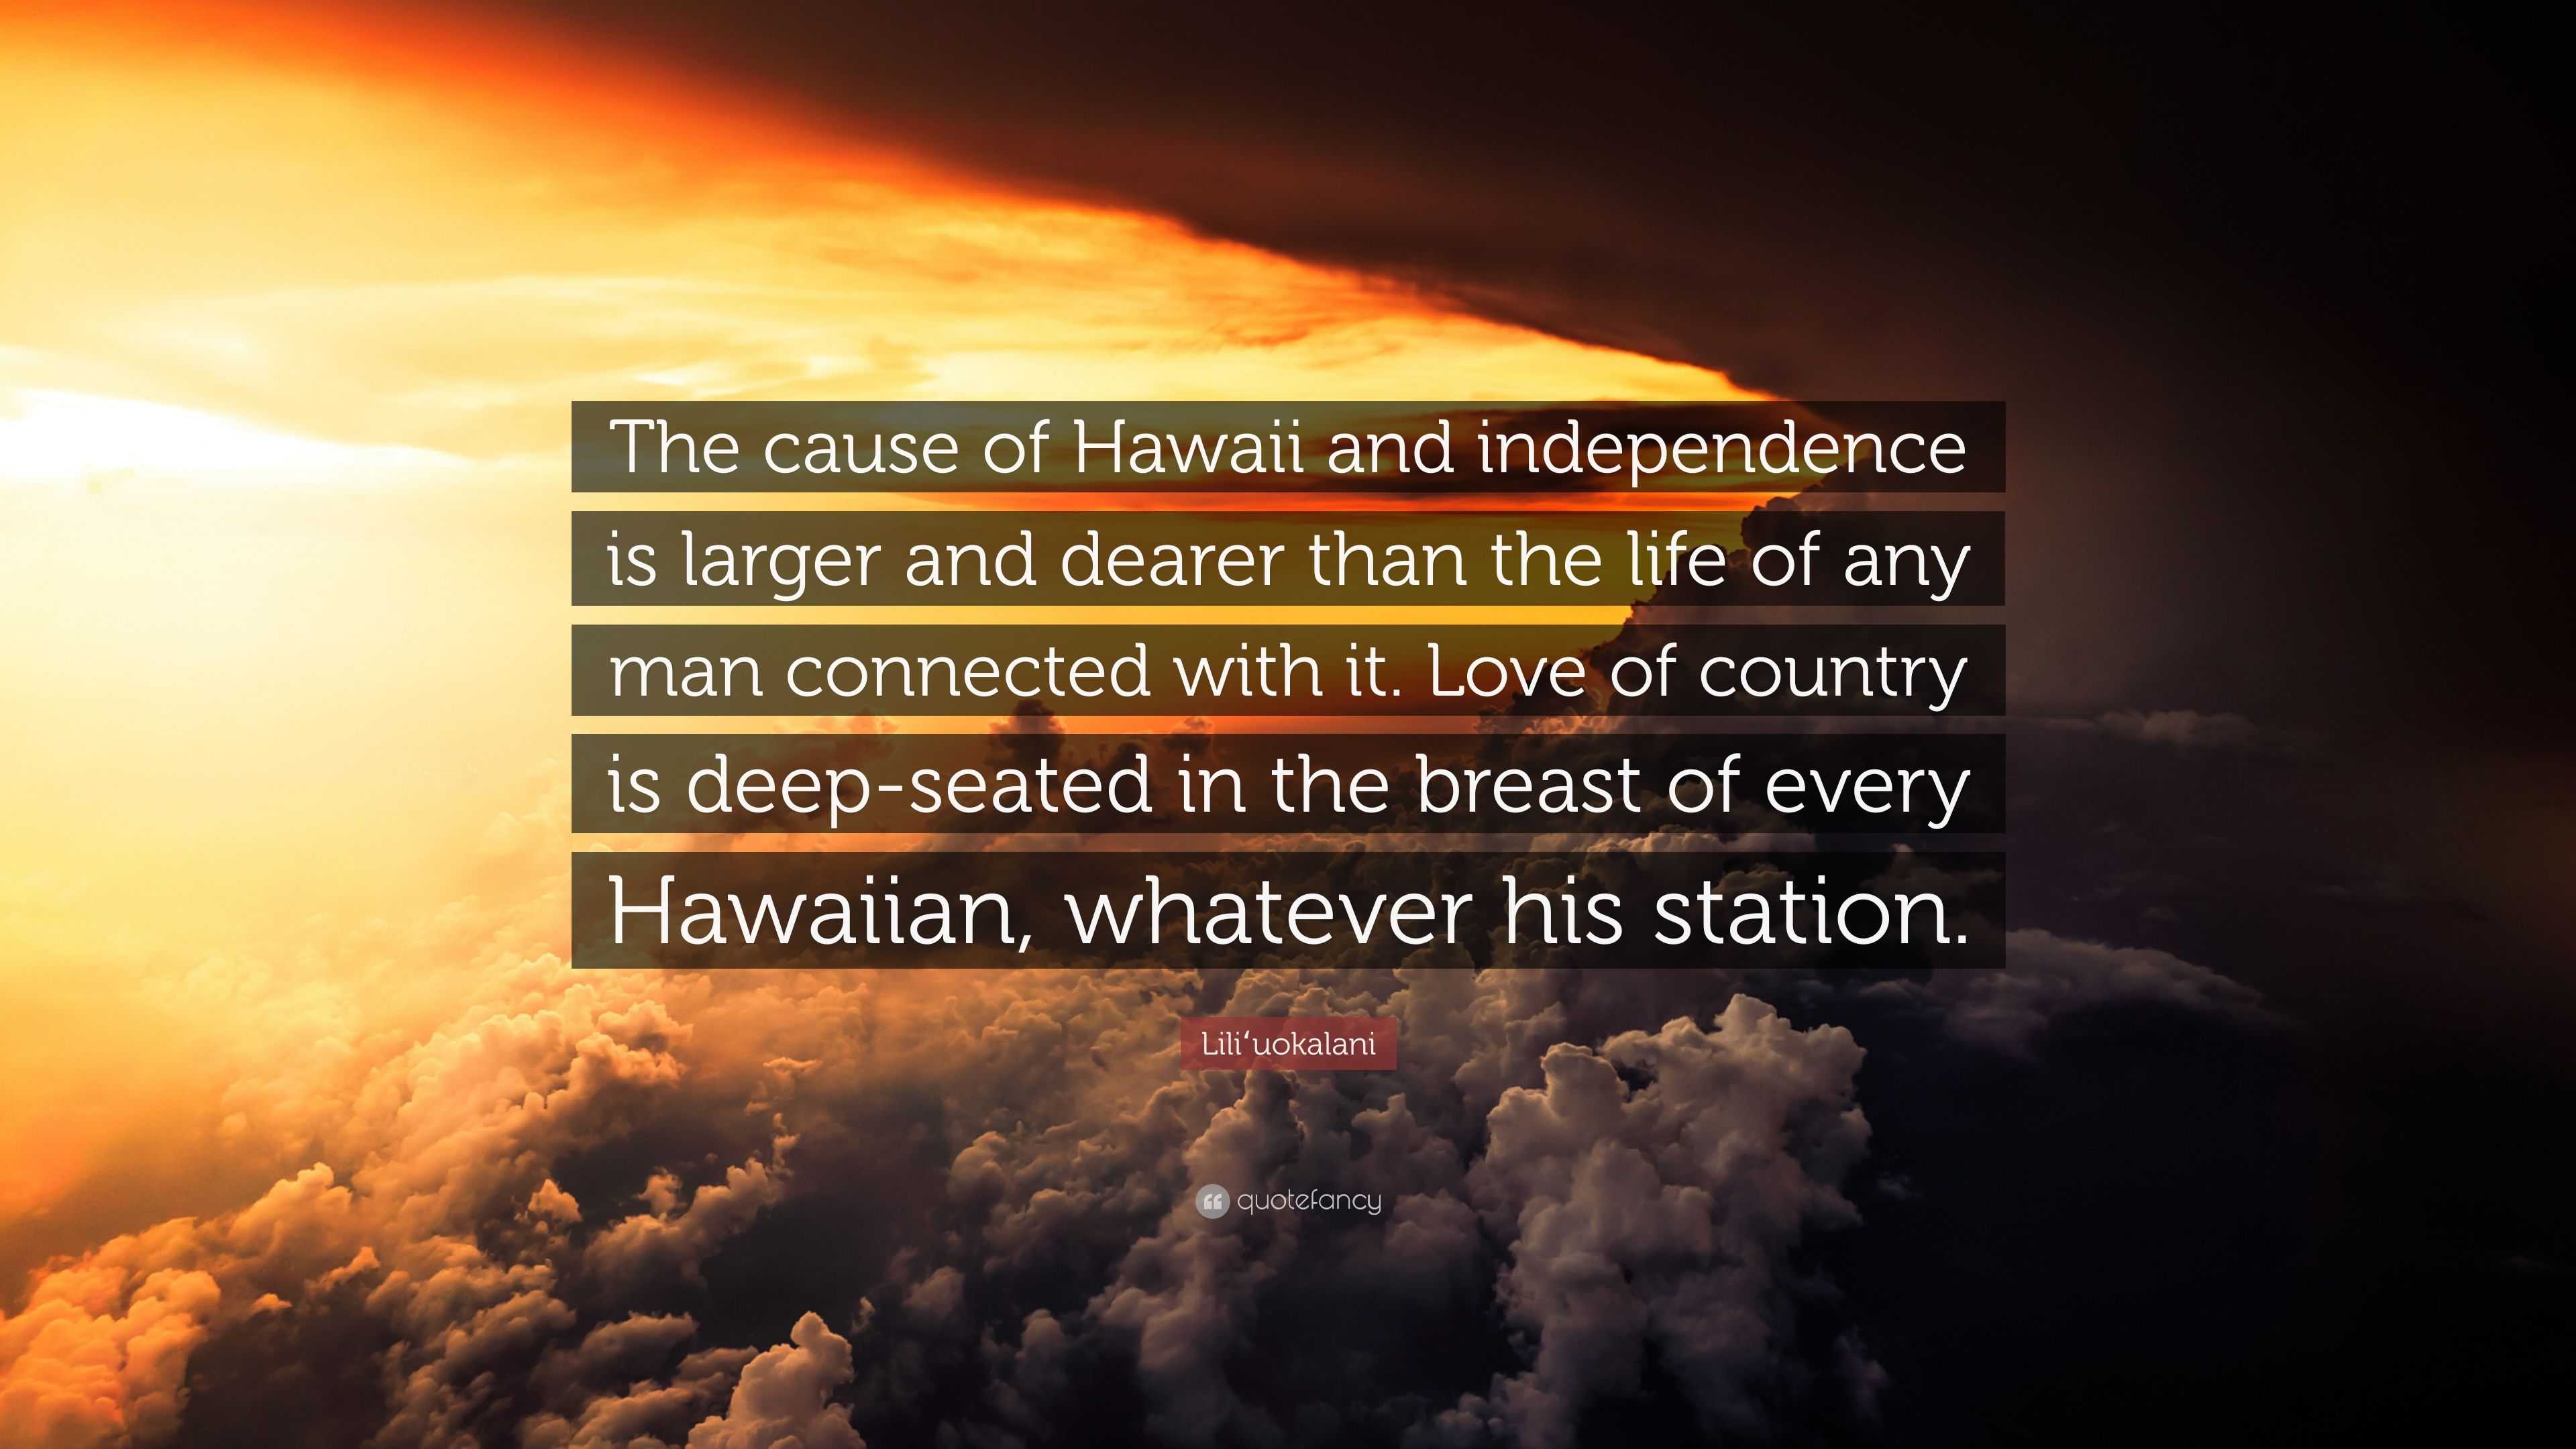 Liliʻuokalani Quote: “The cause of Hawaii and independence is larger